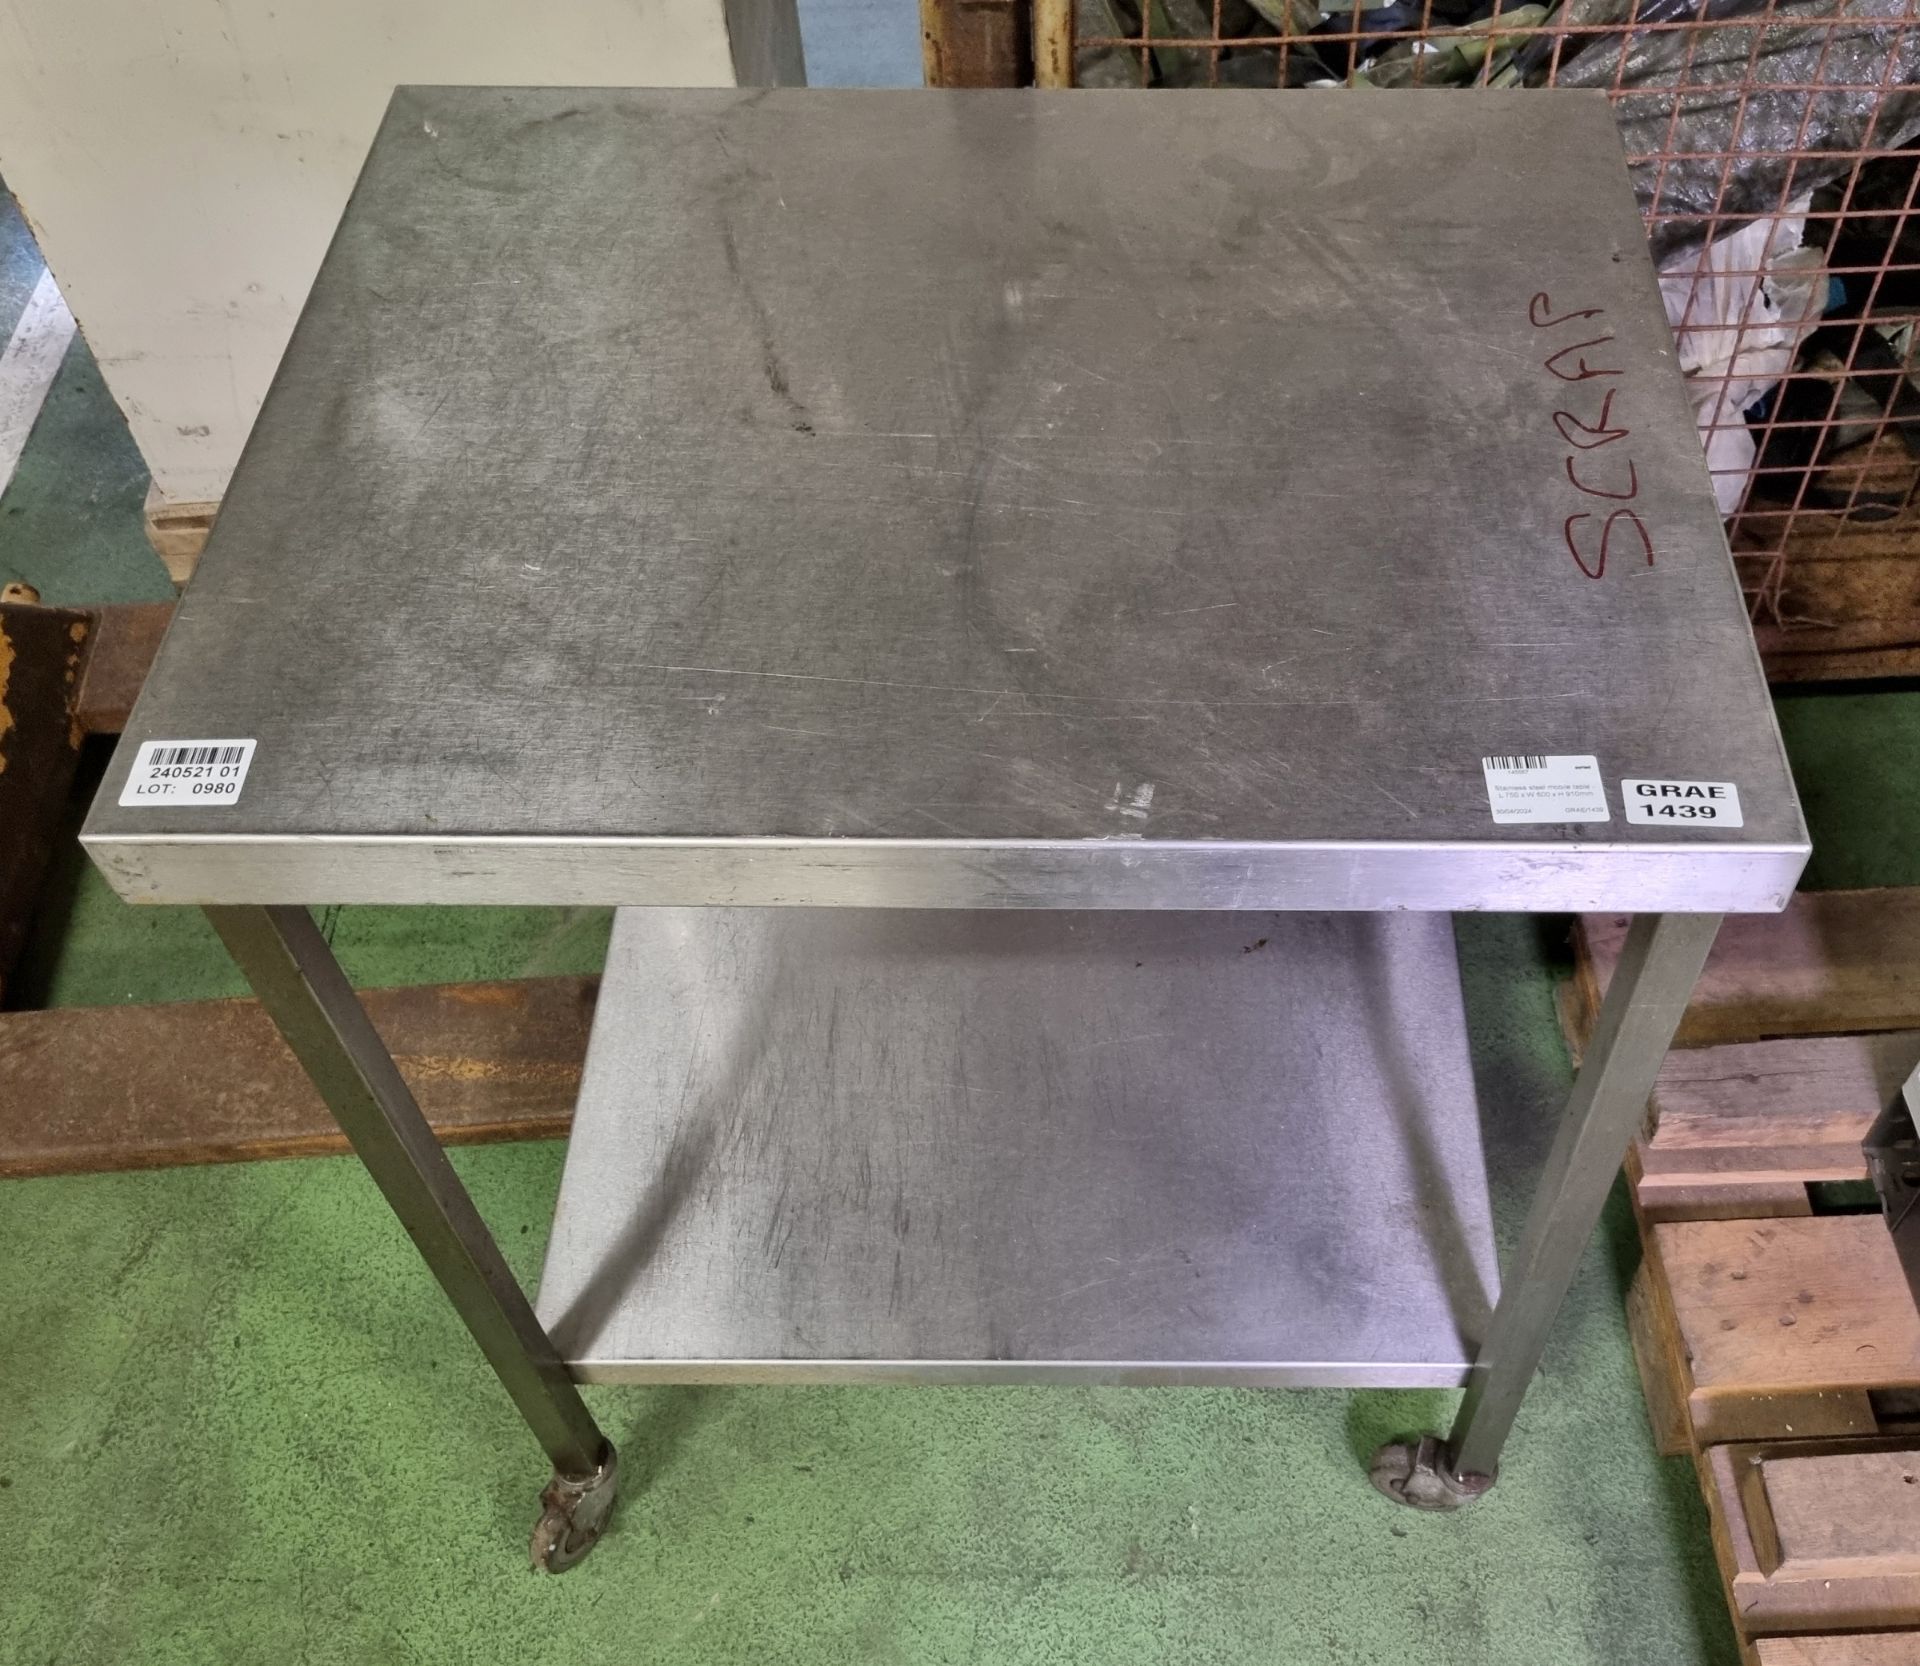 Stainless steel mobile table - L 750 x W 600 x H 910mm - Image 2 of 3